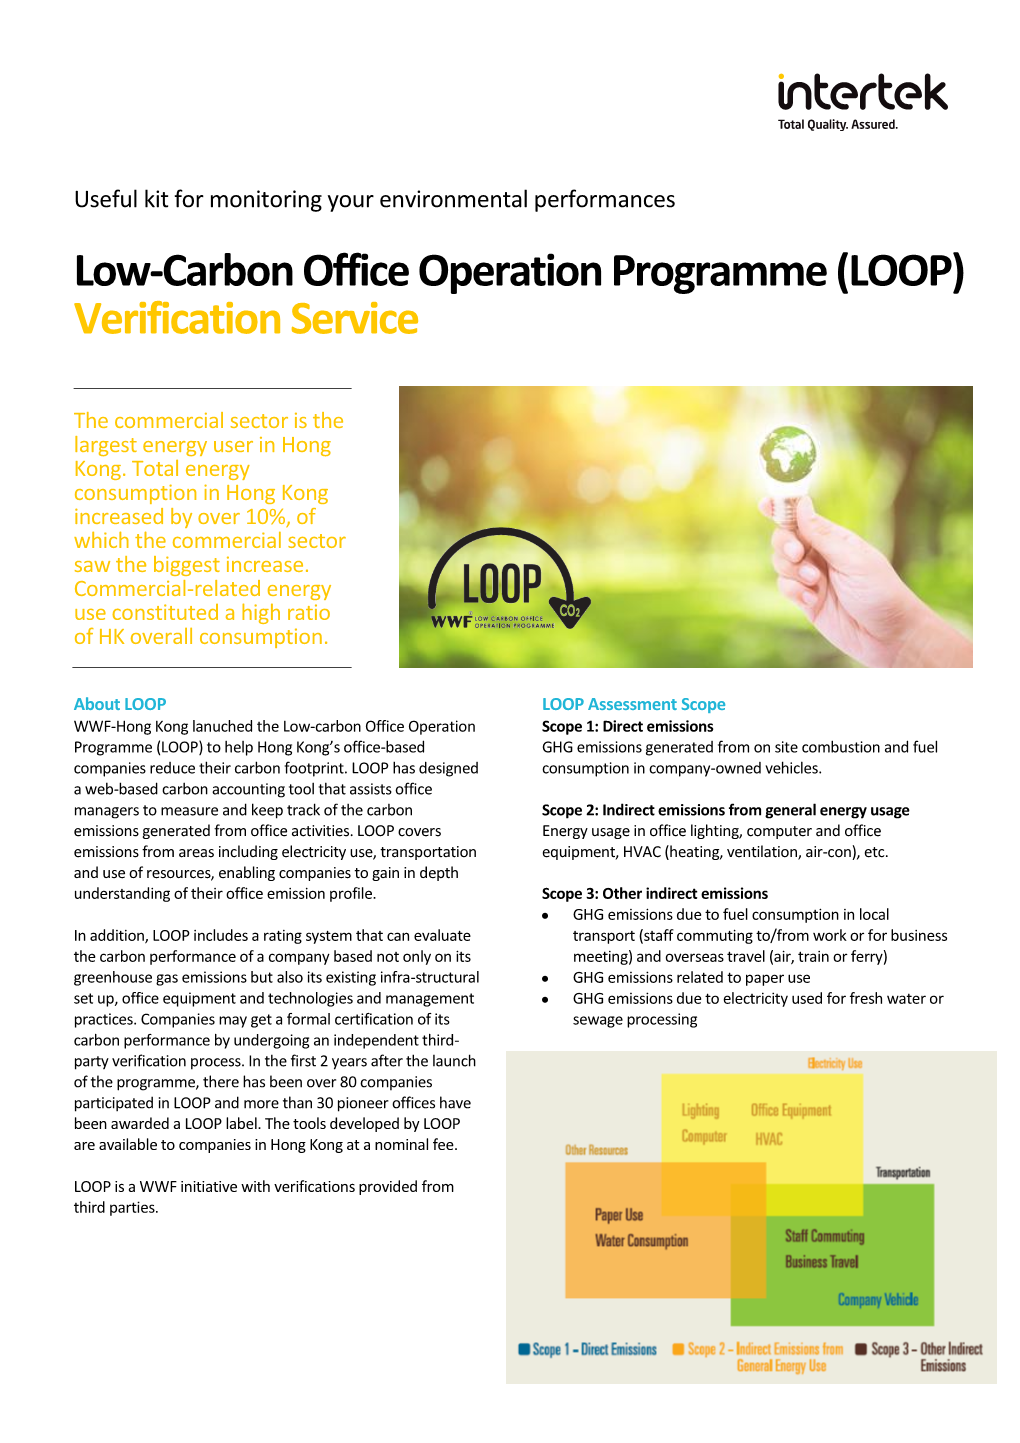 Low-Carbon Office Operation Programme (LOOP) Verification Service